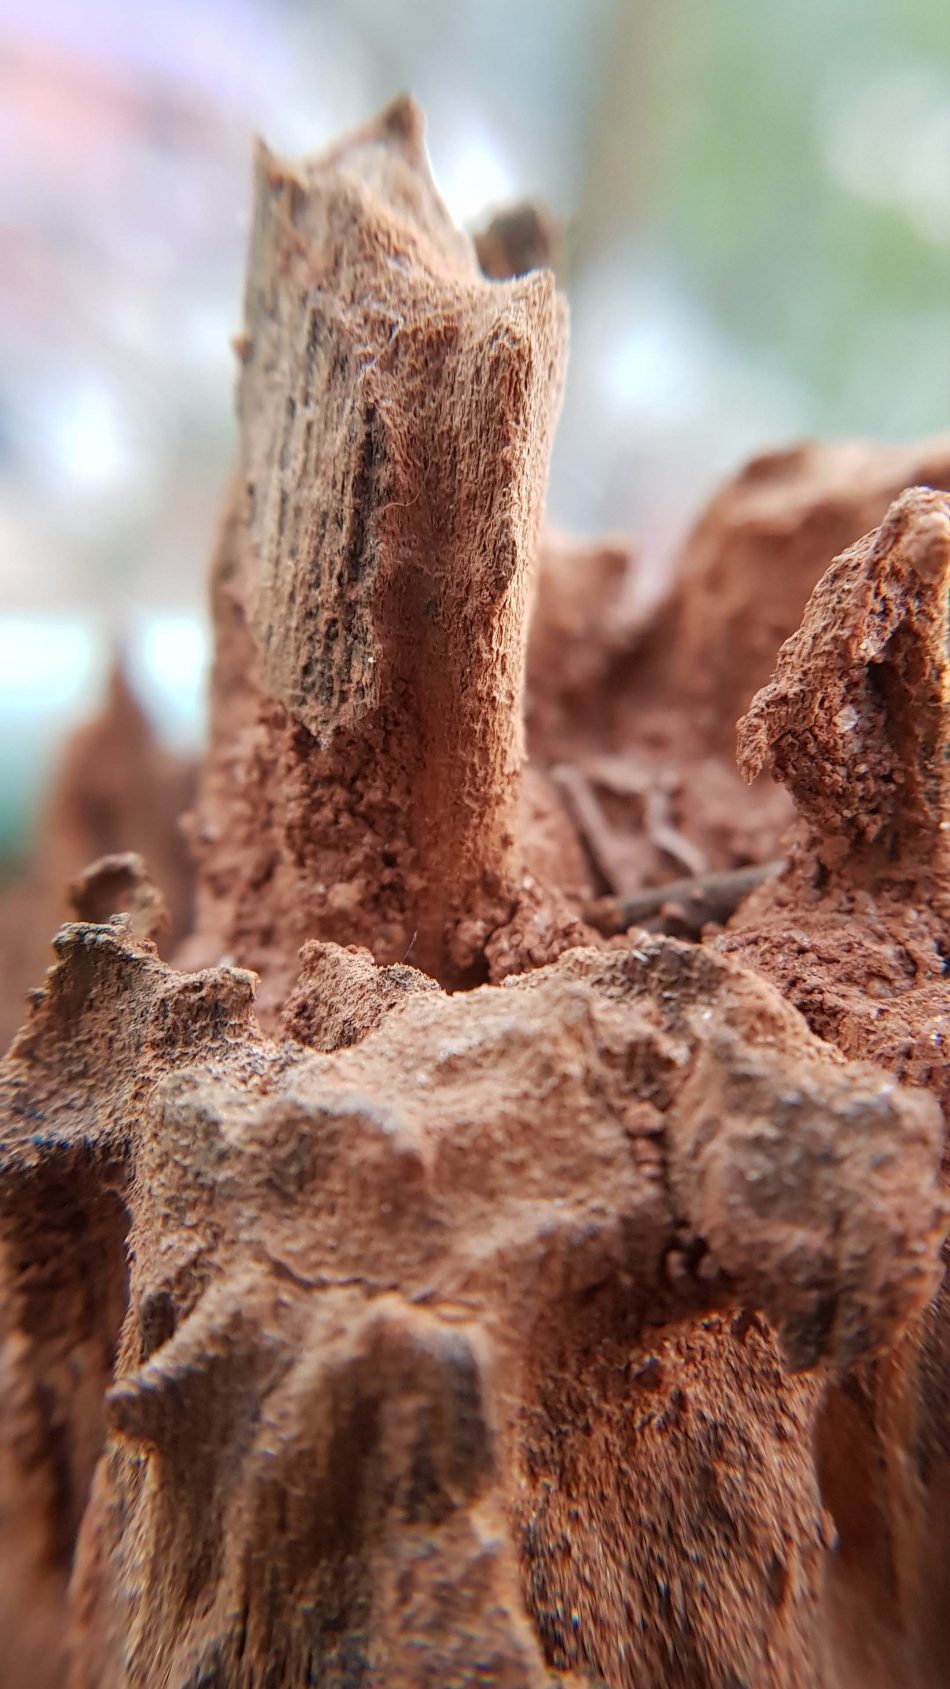 Dry Tree Covered By Termite Mud 4K Ultra HD Mobile Wallpaper